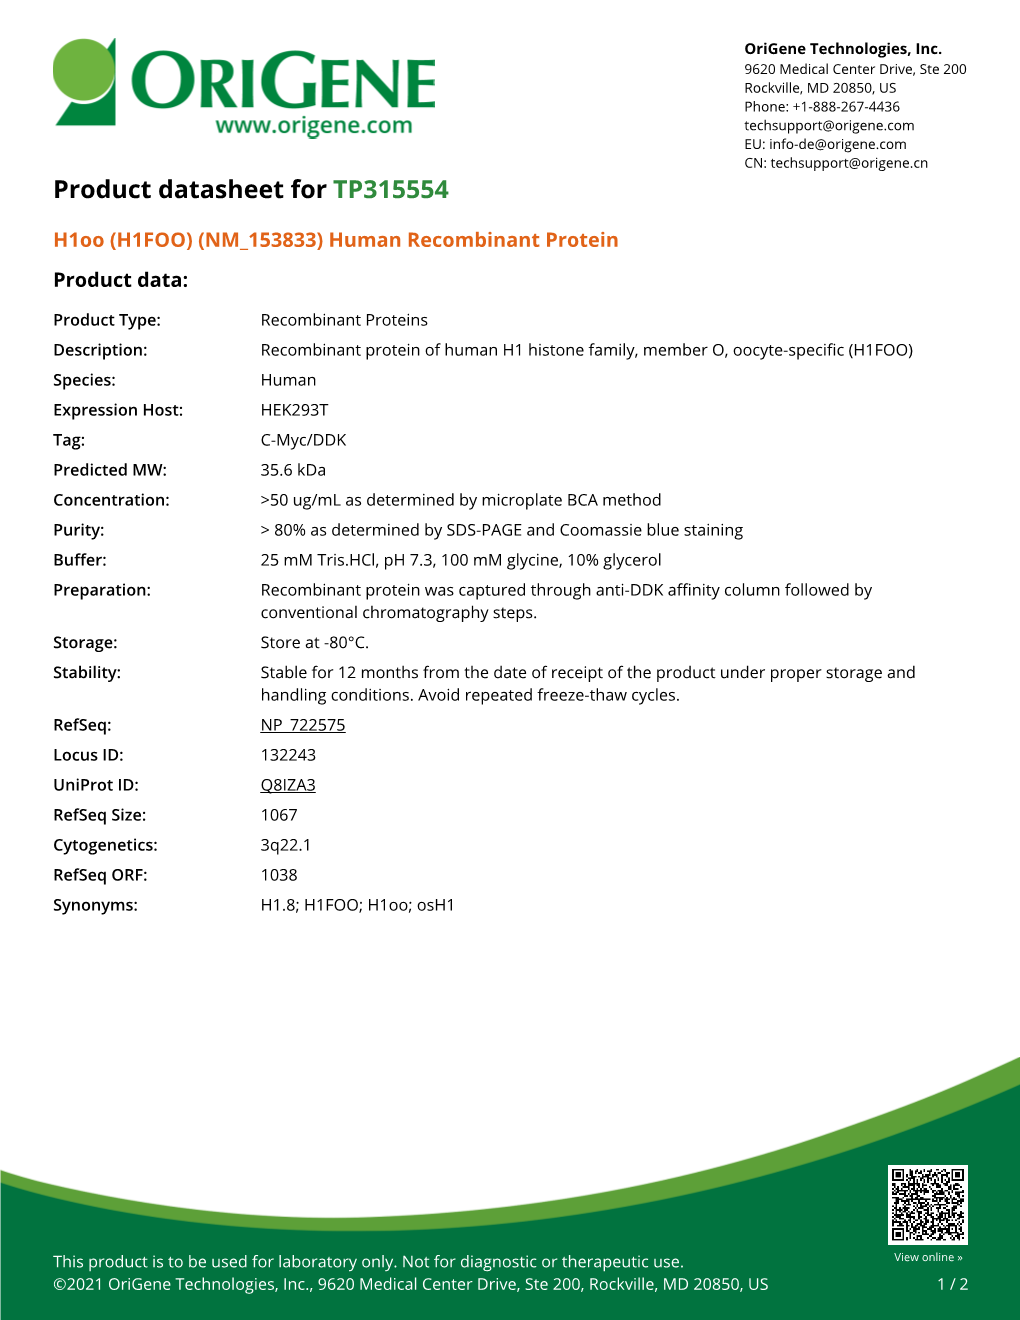 H1oo (H1FOO) (NM 153833) Human Recombinant Protein Product Data